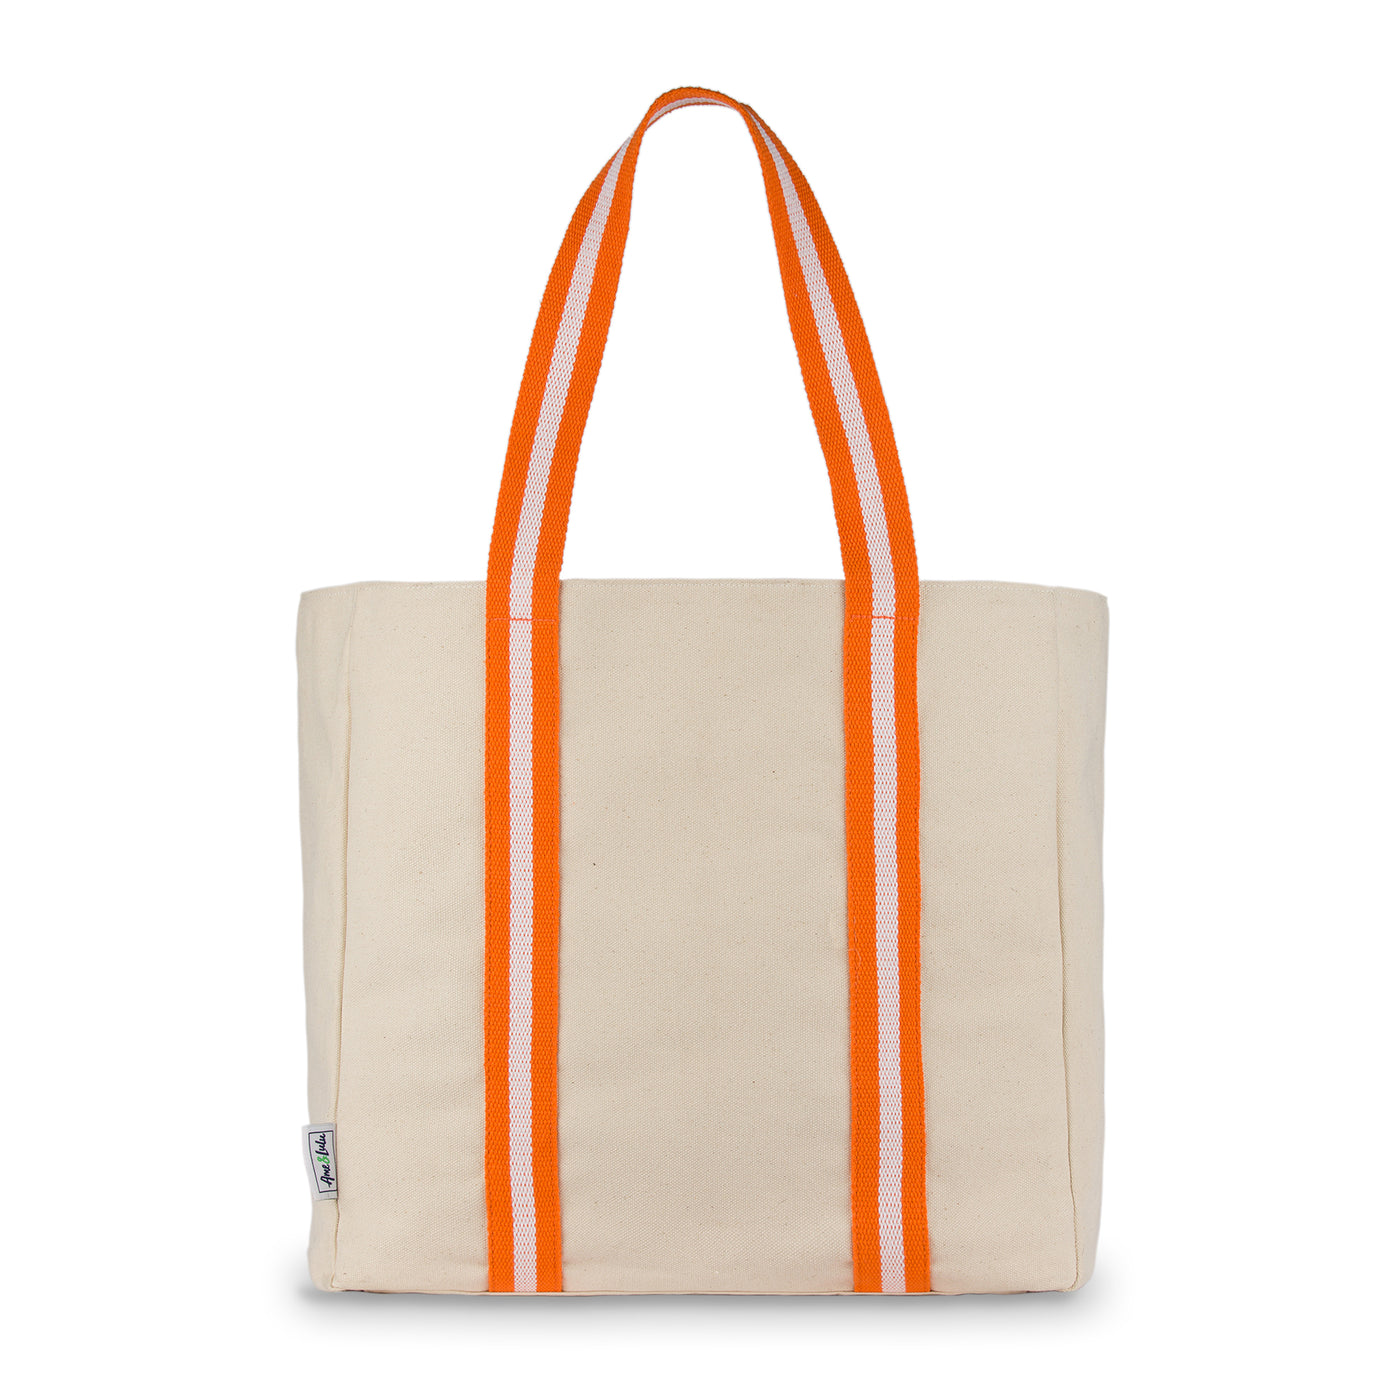 natural canvas tote with orange and white cotton webbing straps